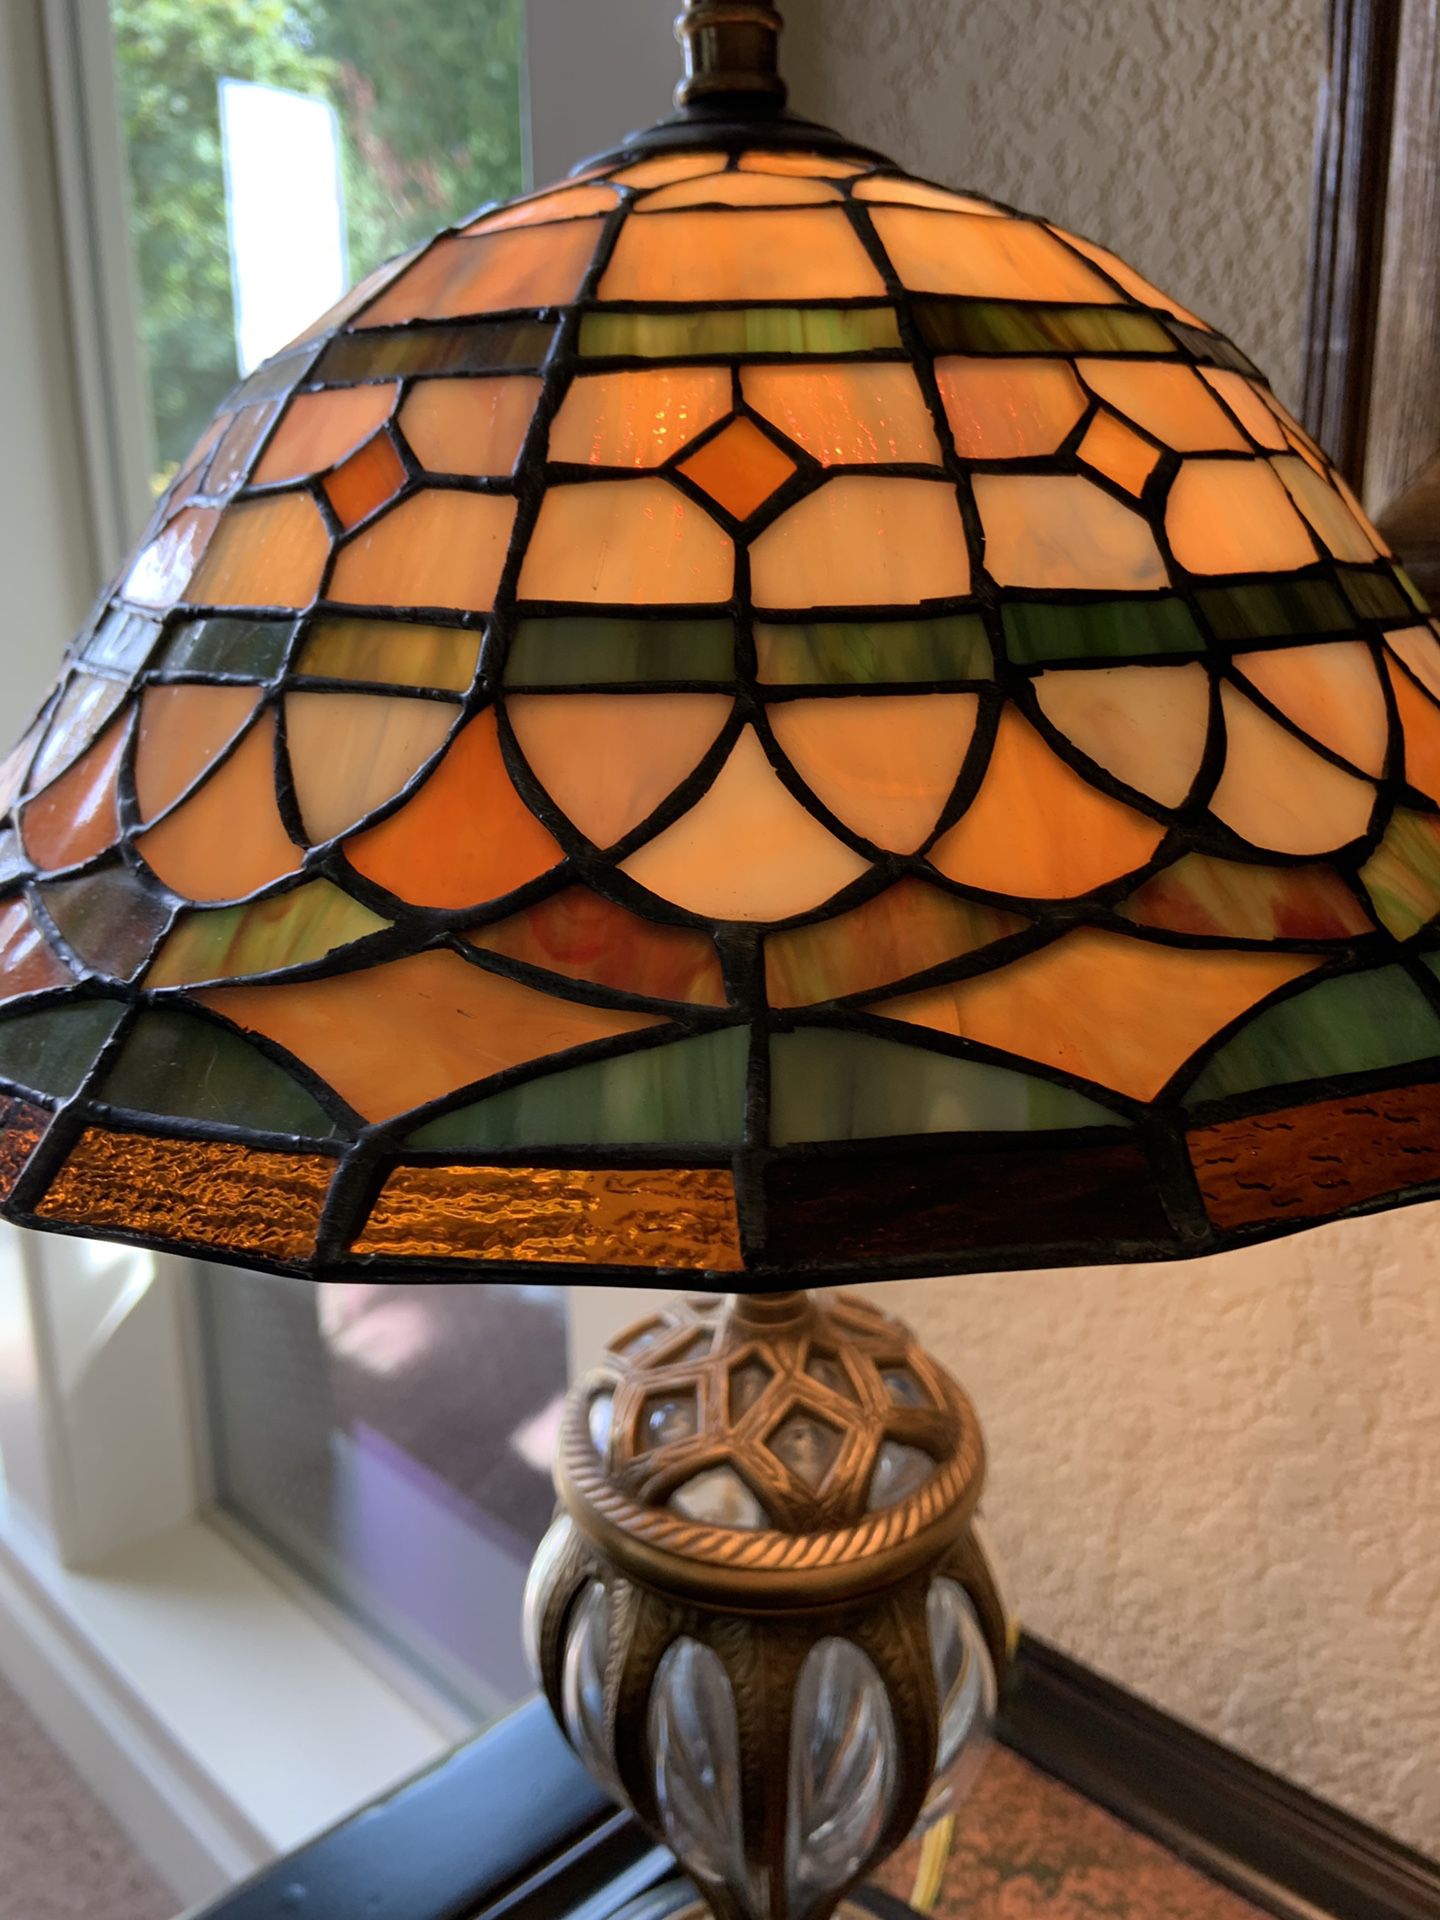 Vintage Stain glass lamp